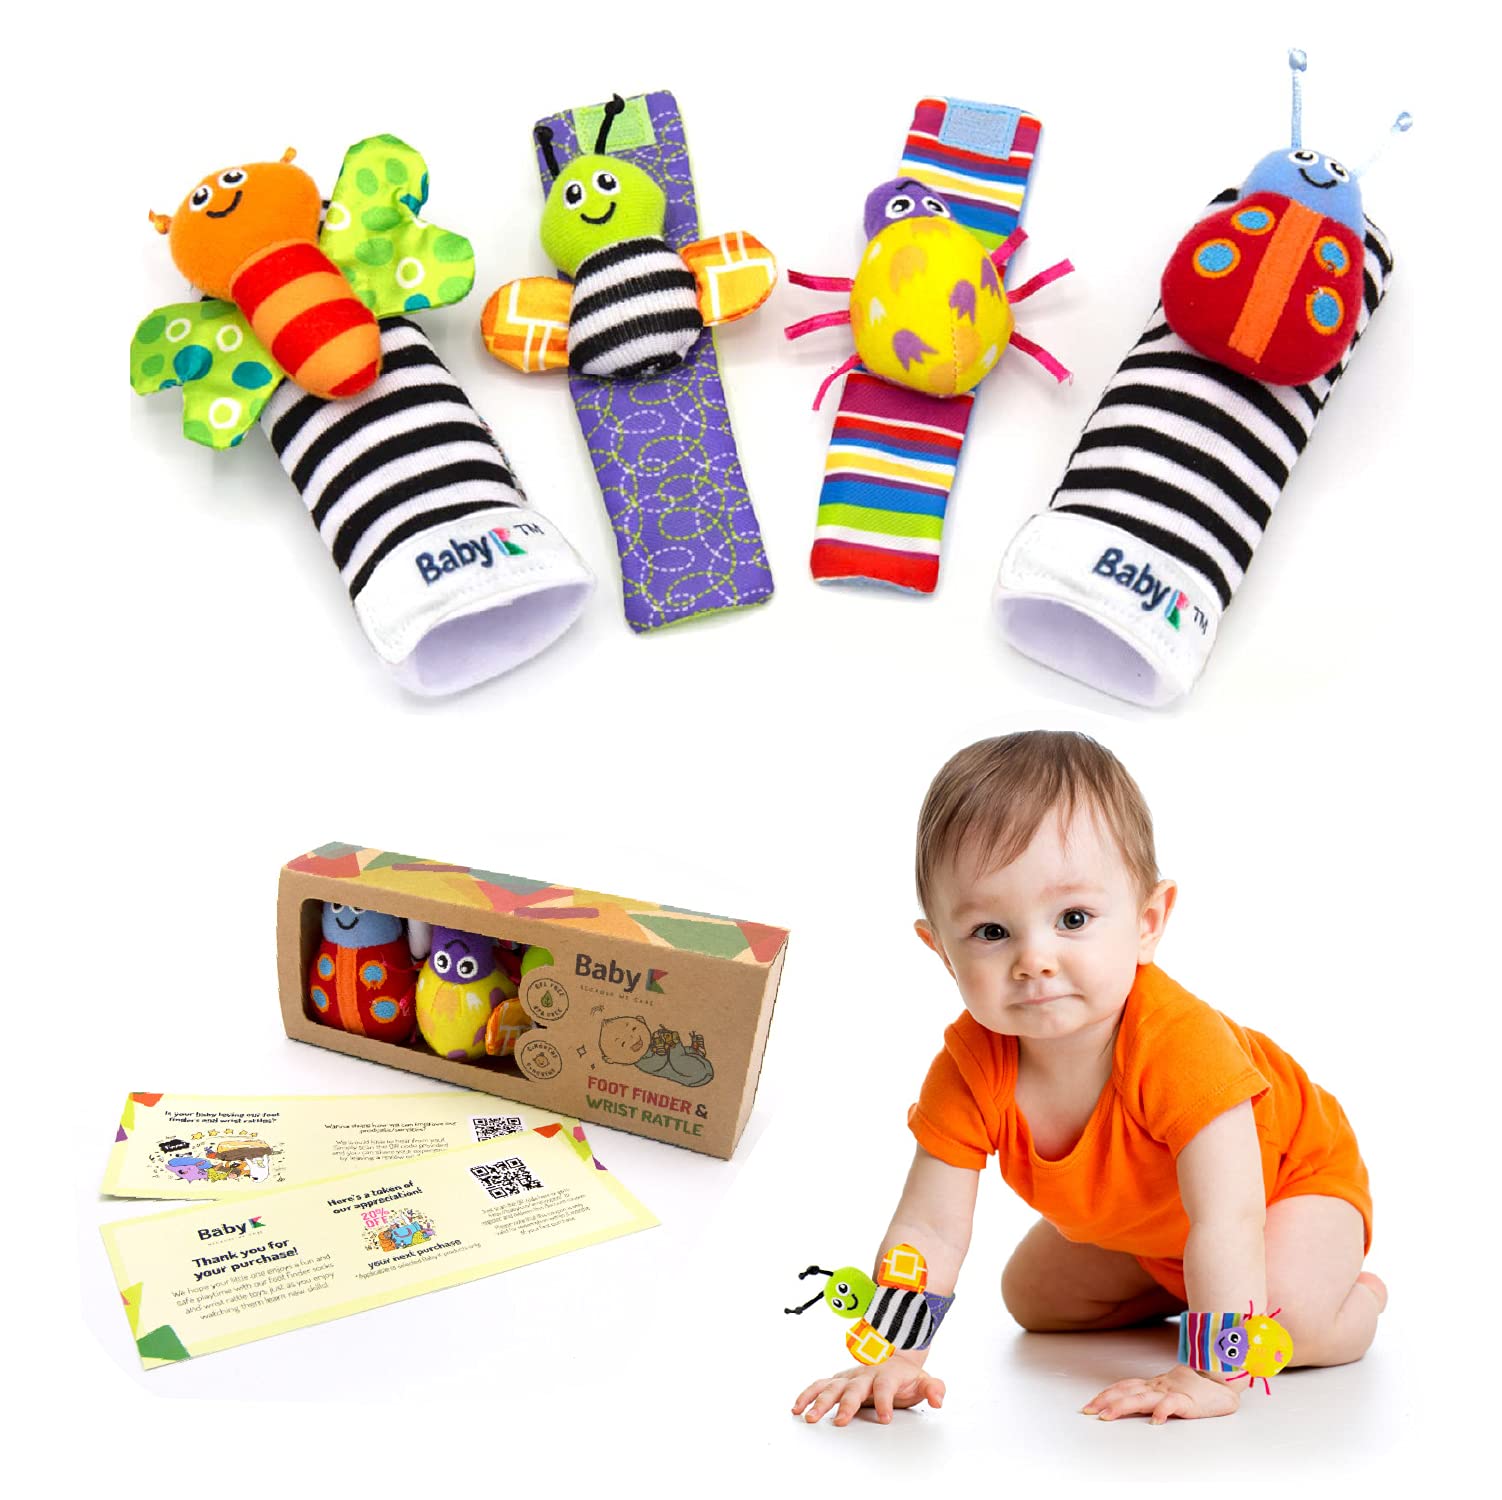 BABY K Foot Finder Socks & Wrist Rattles (Set C) - Newborn Toys for Baby  Boy or Girl - Brain Development Infant Toys - Hand and Foot Rattles  Suitable for 0-3, 3-6, 6-12 Months Babies Butterfly Bugs